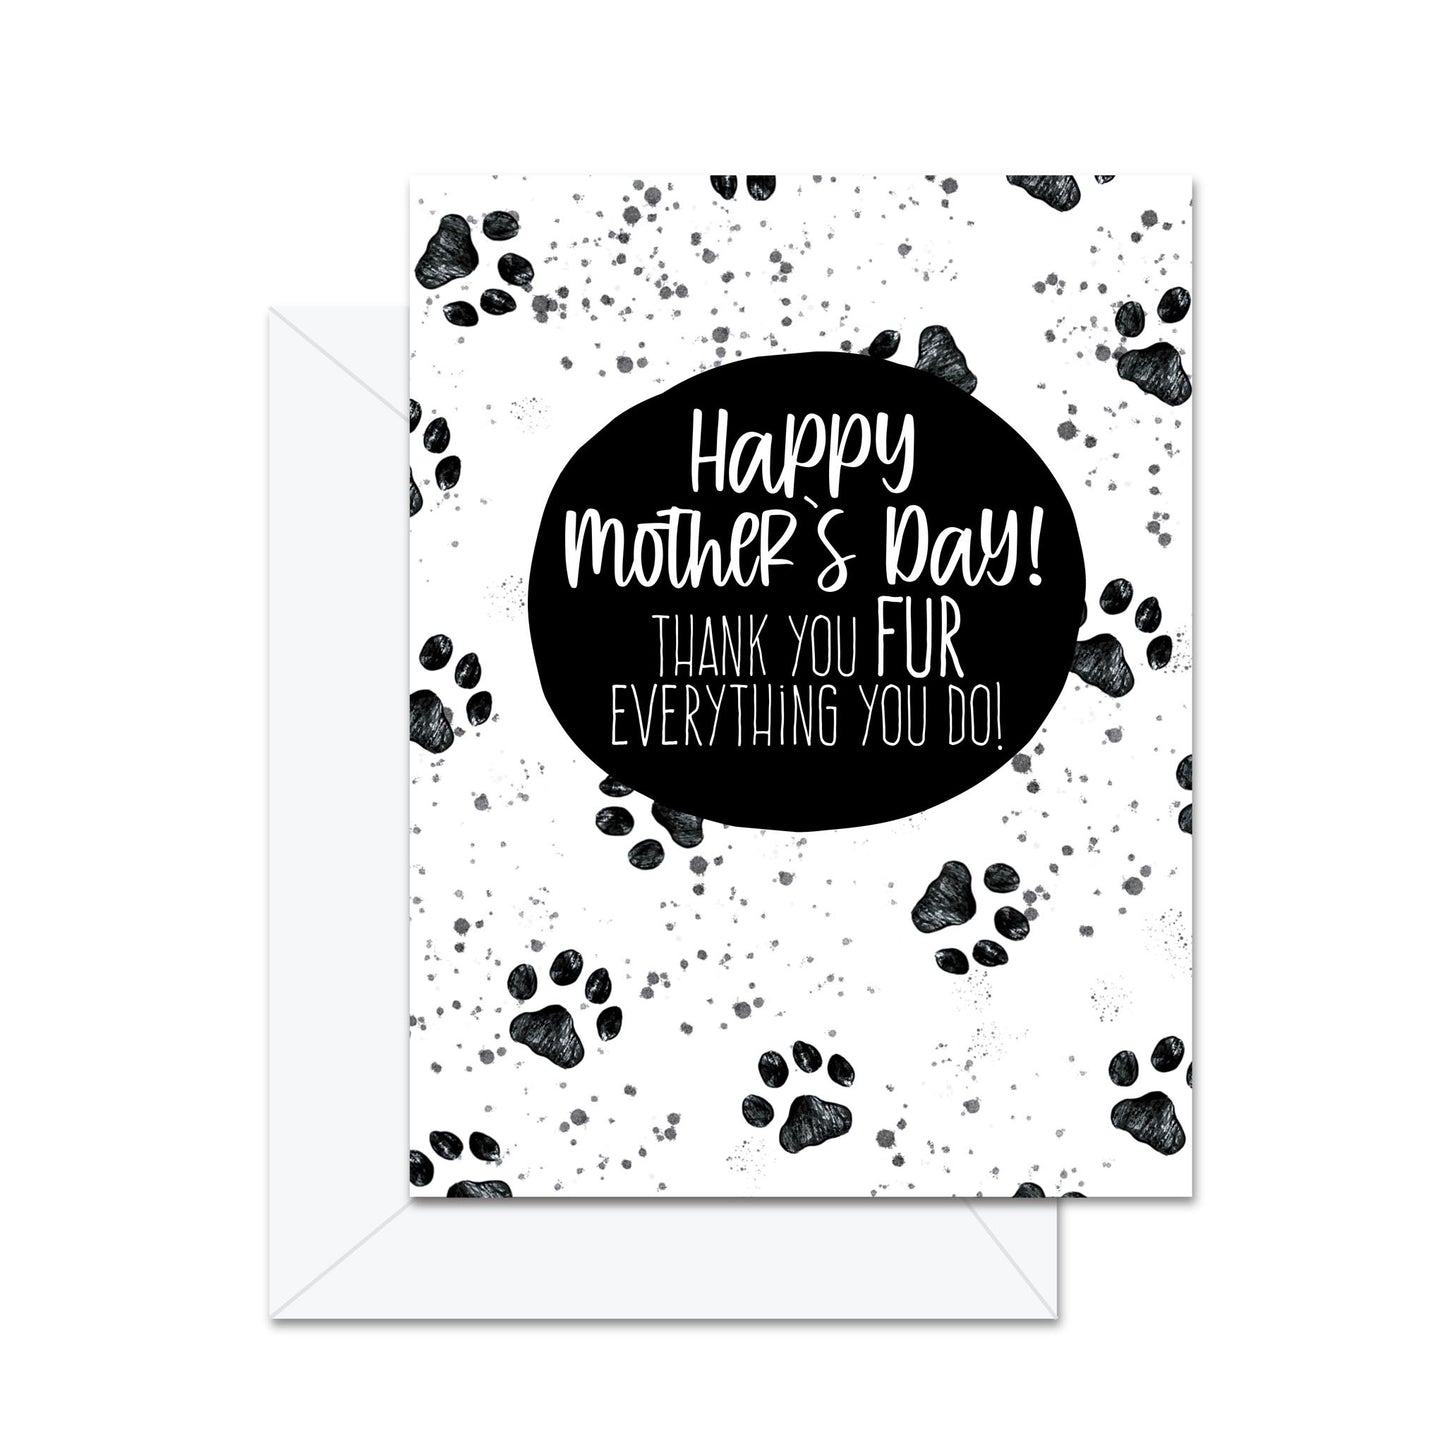 Happy Mother's Day! Thank You FUR Everything You Do! - Greeting Card